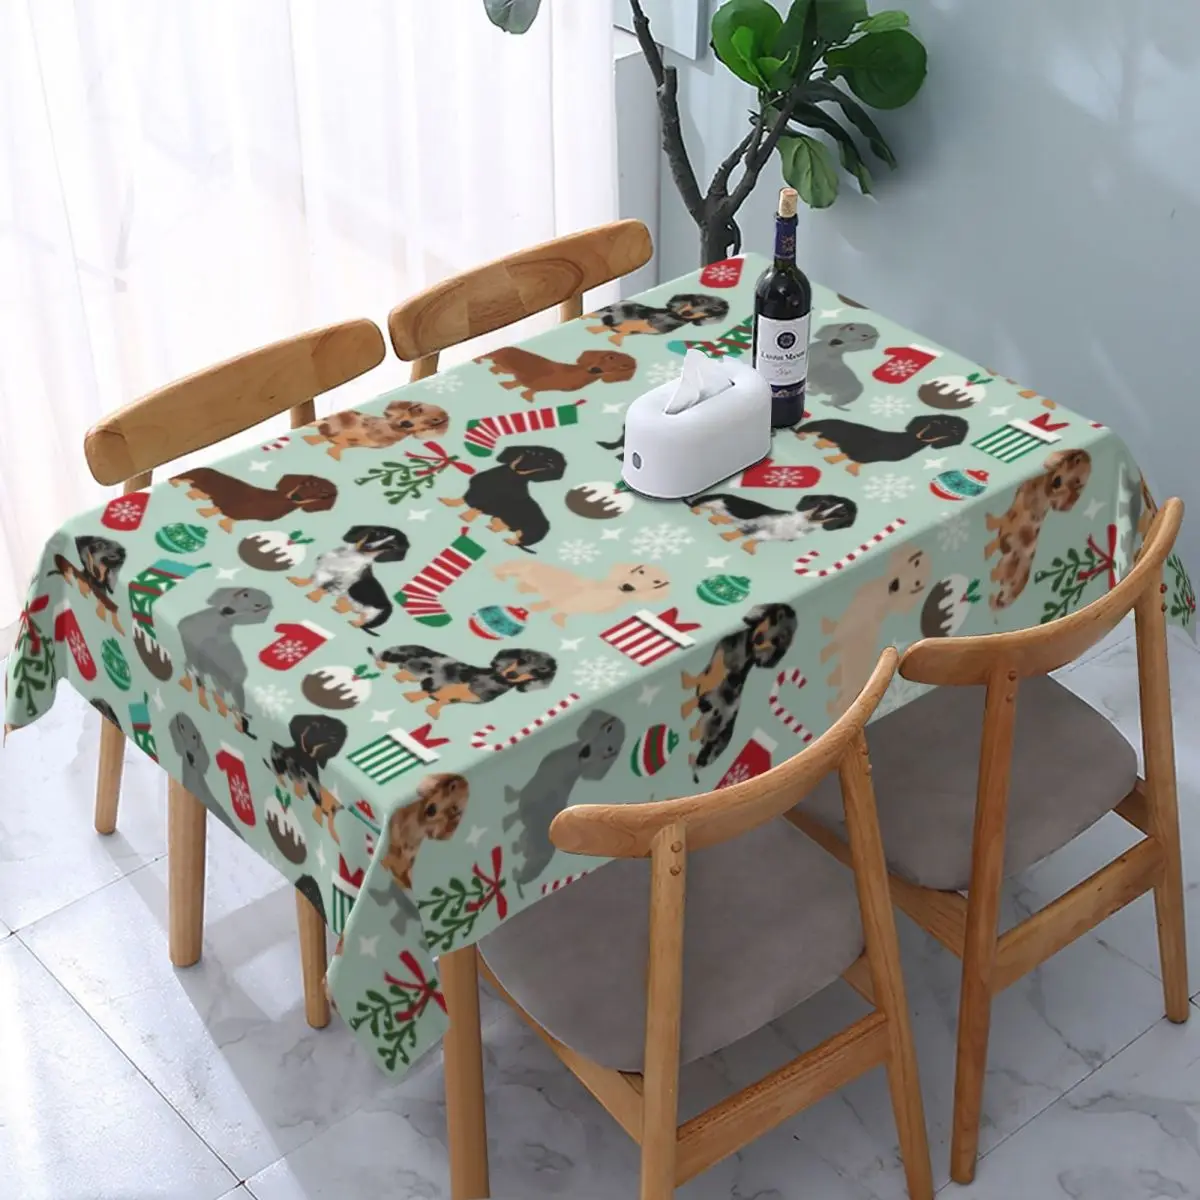 

Dachshunds Retro Christmas Tablecloth Rectangular Elastic Waterproof Sausage Wiener Badger Dogs Table Cloth Cover for Party